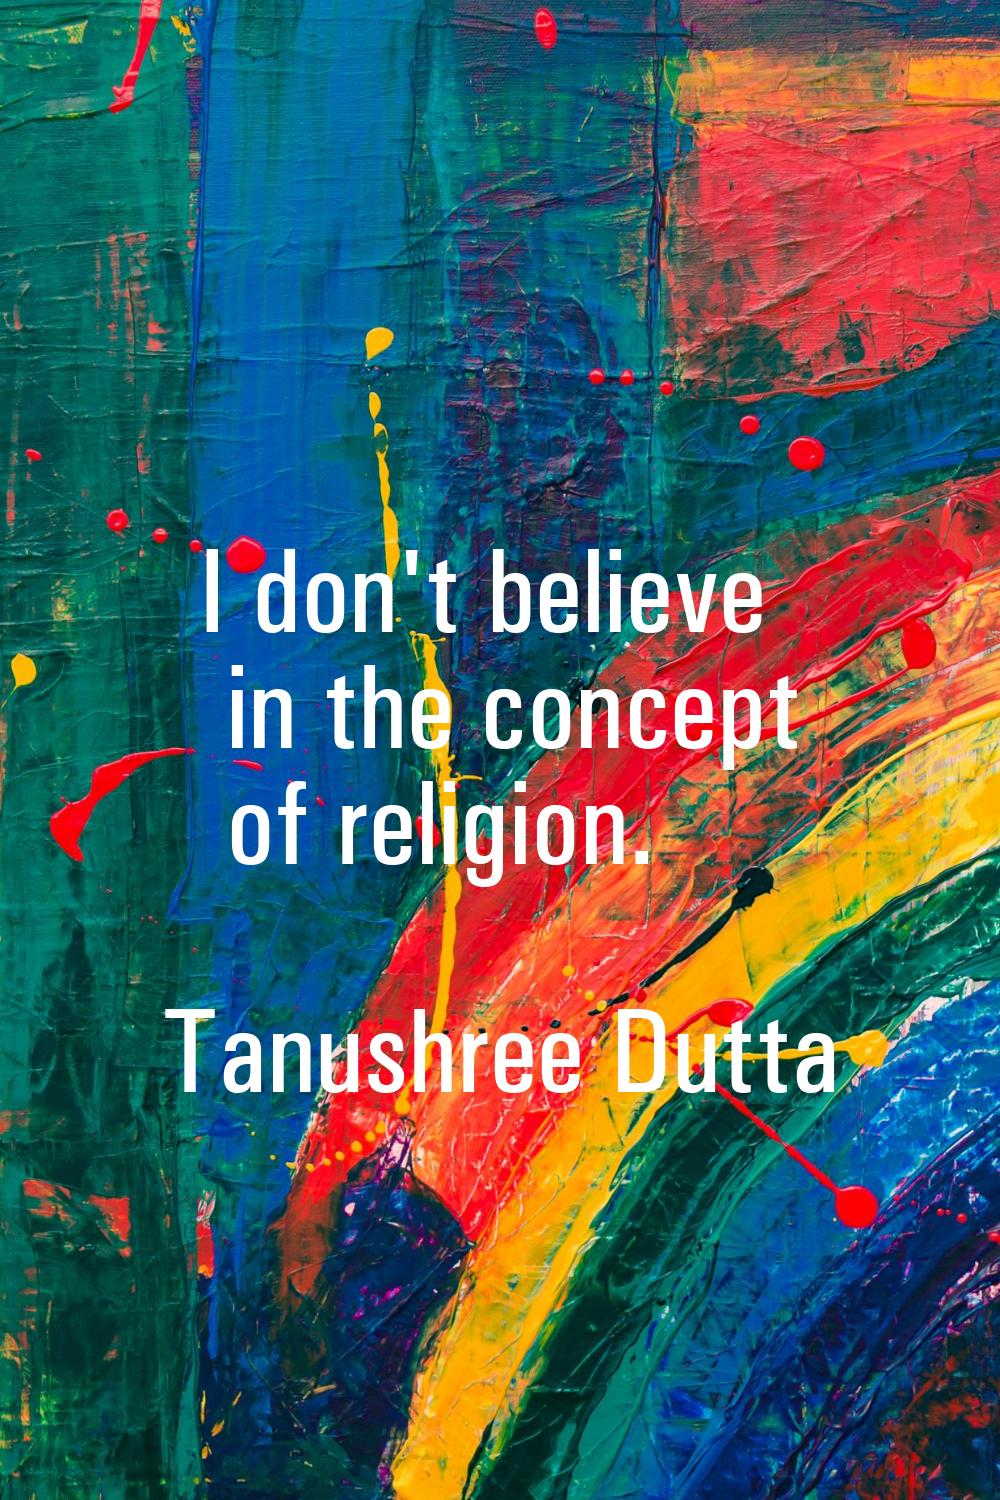 I don't believe in the concept of religion.